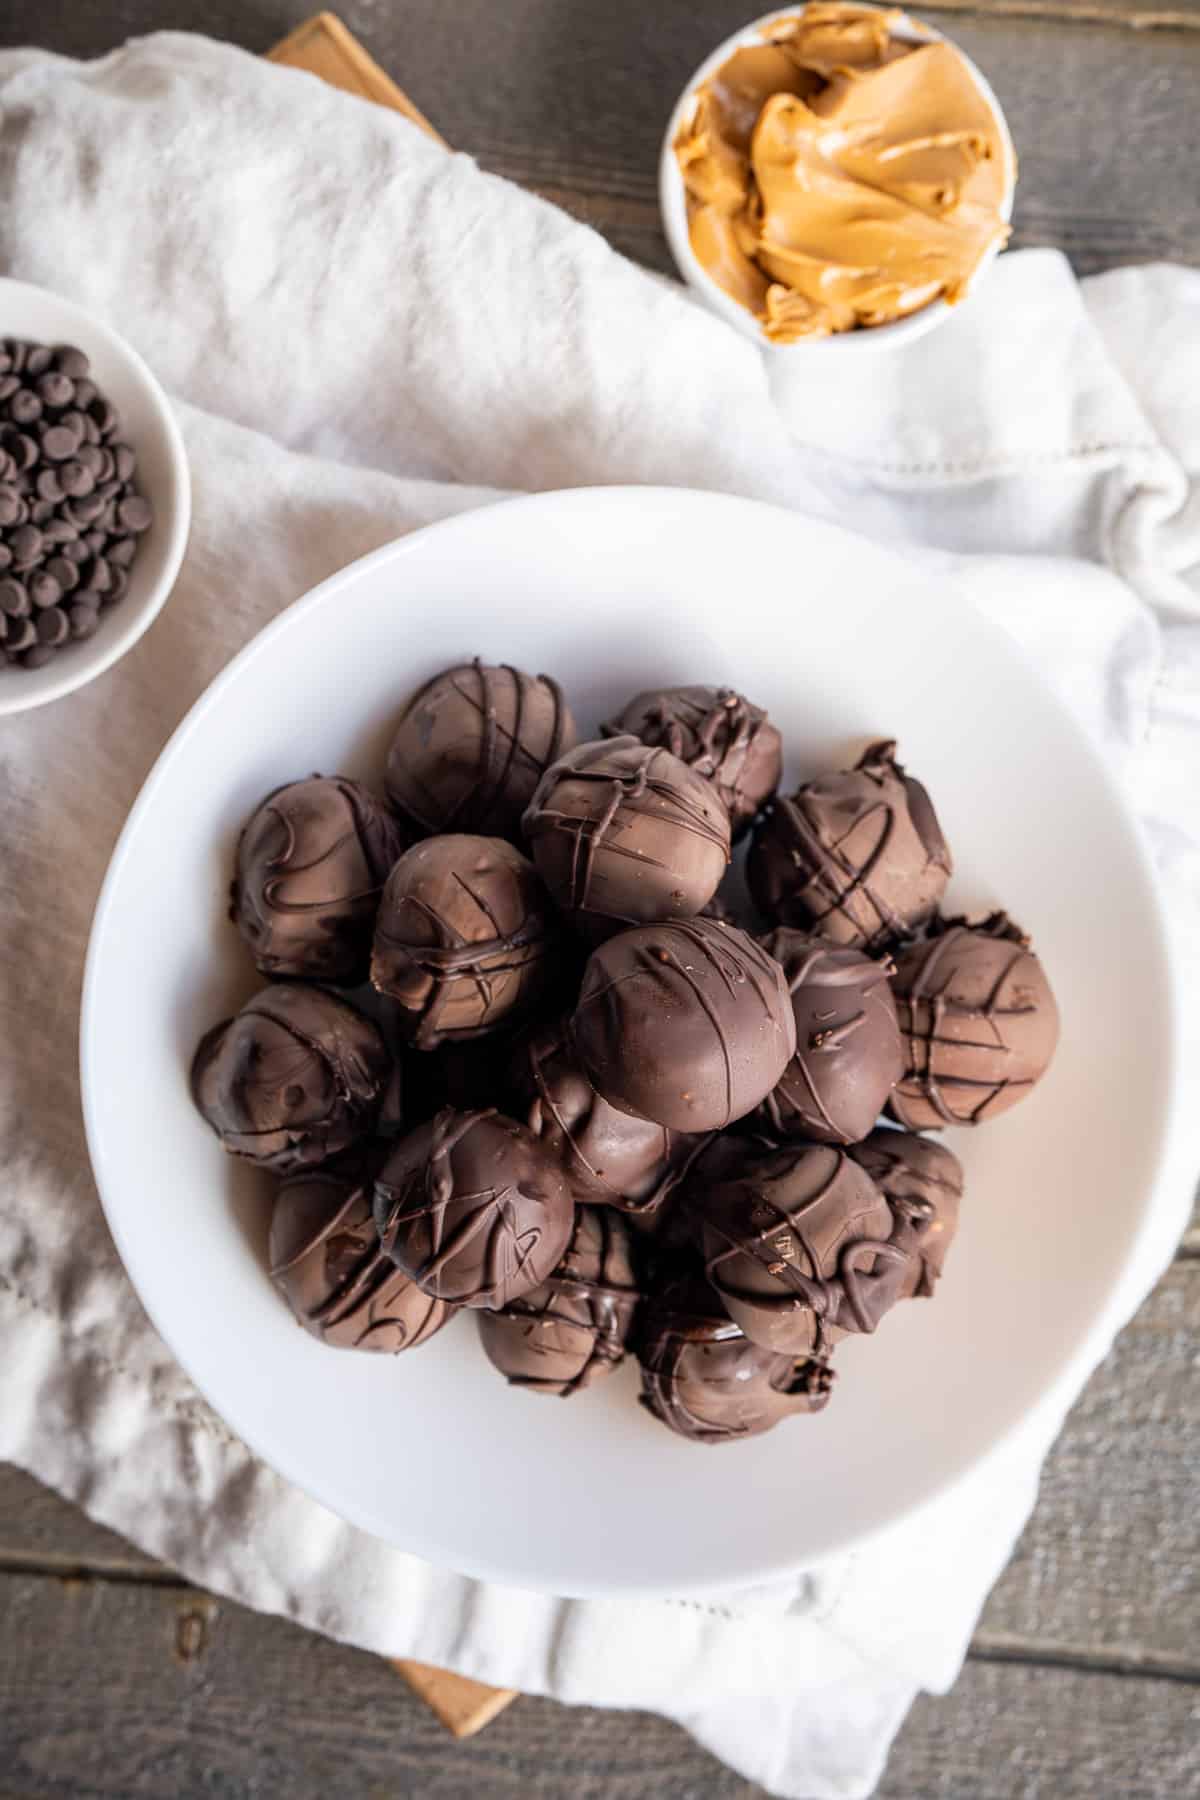 A pile of no bake peanut butter balls covered in chocolate.